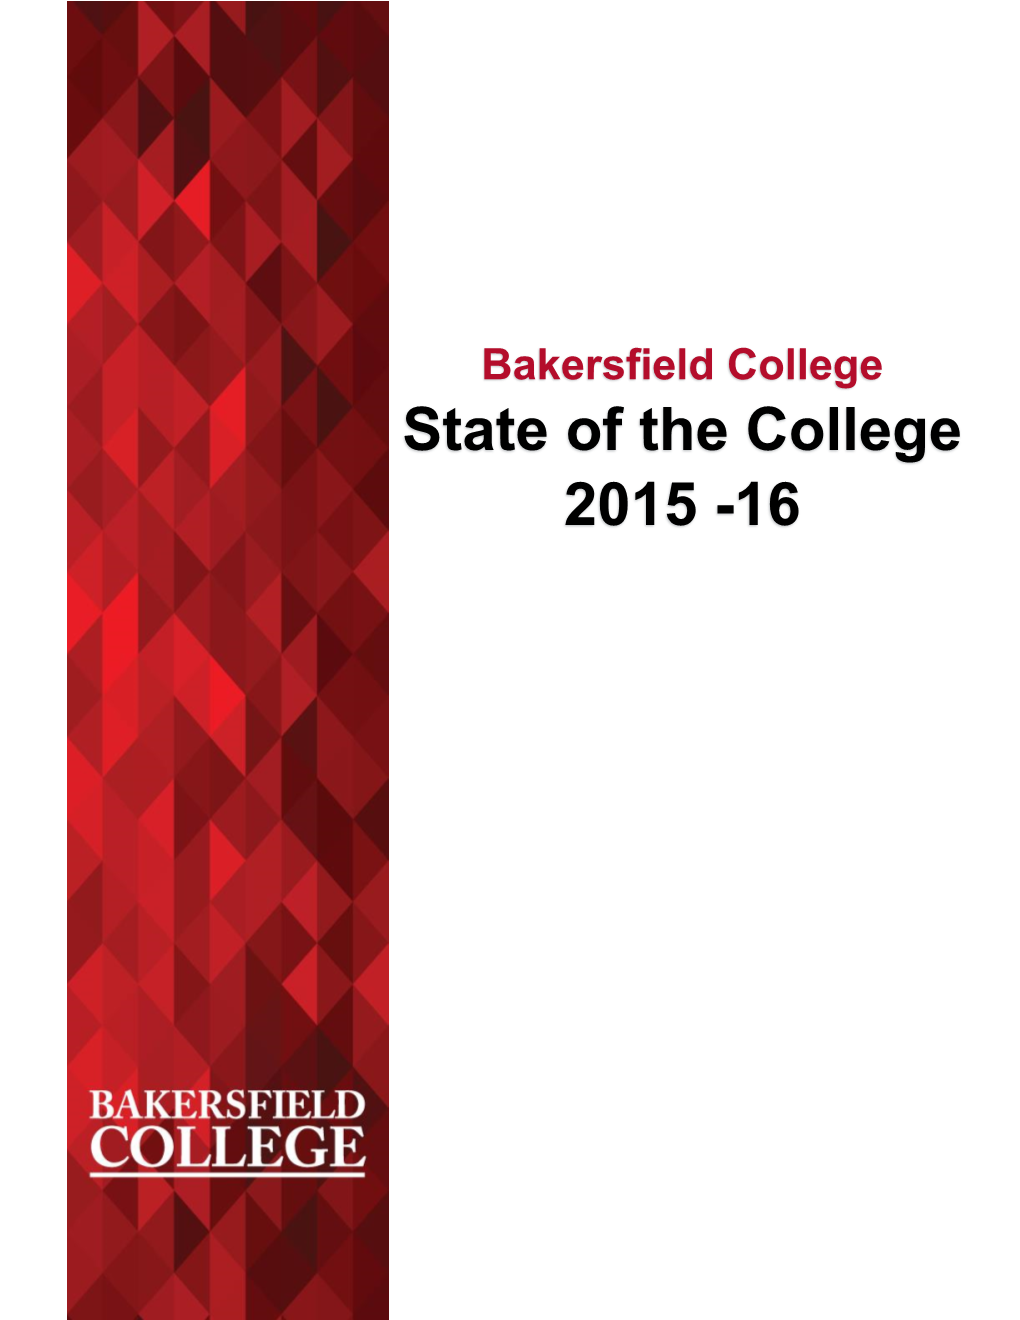 State of the College 2015-16